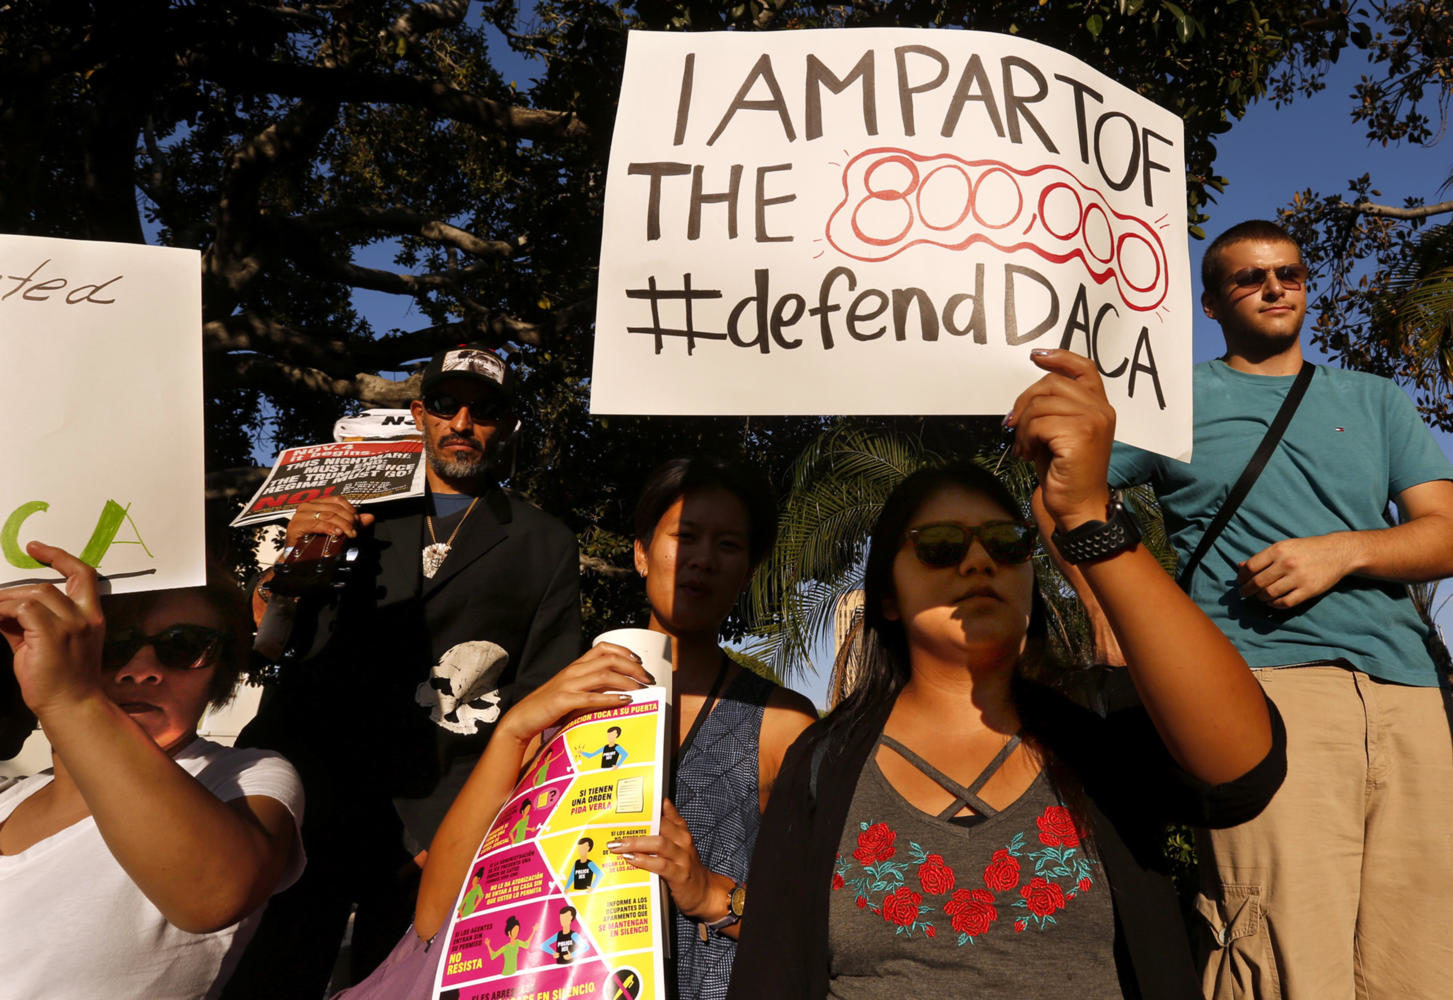 Los Angeles Harbor College student Brenda Soriano, second from right, and her mother Edilbertha Martinez, left, participate in a rally in support of the Deferred Action for Child Arrivals, or DACA program in Los Angeles on September 5, 2017. Brenda and her sister Diana Martinez are in the Deferred Action for Child Arrivals, or DACA program. The Soriano family are originally from Oaxaca, Mexico. Diana is studying to be an aerospace engineer and Brenda is studying to be a journalist. The girls came illegally to the U.S. at ages 3 and 7 in the back of a van through Tijuana. (Genaro Molina/Los Angeles Times/TNS)